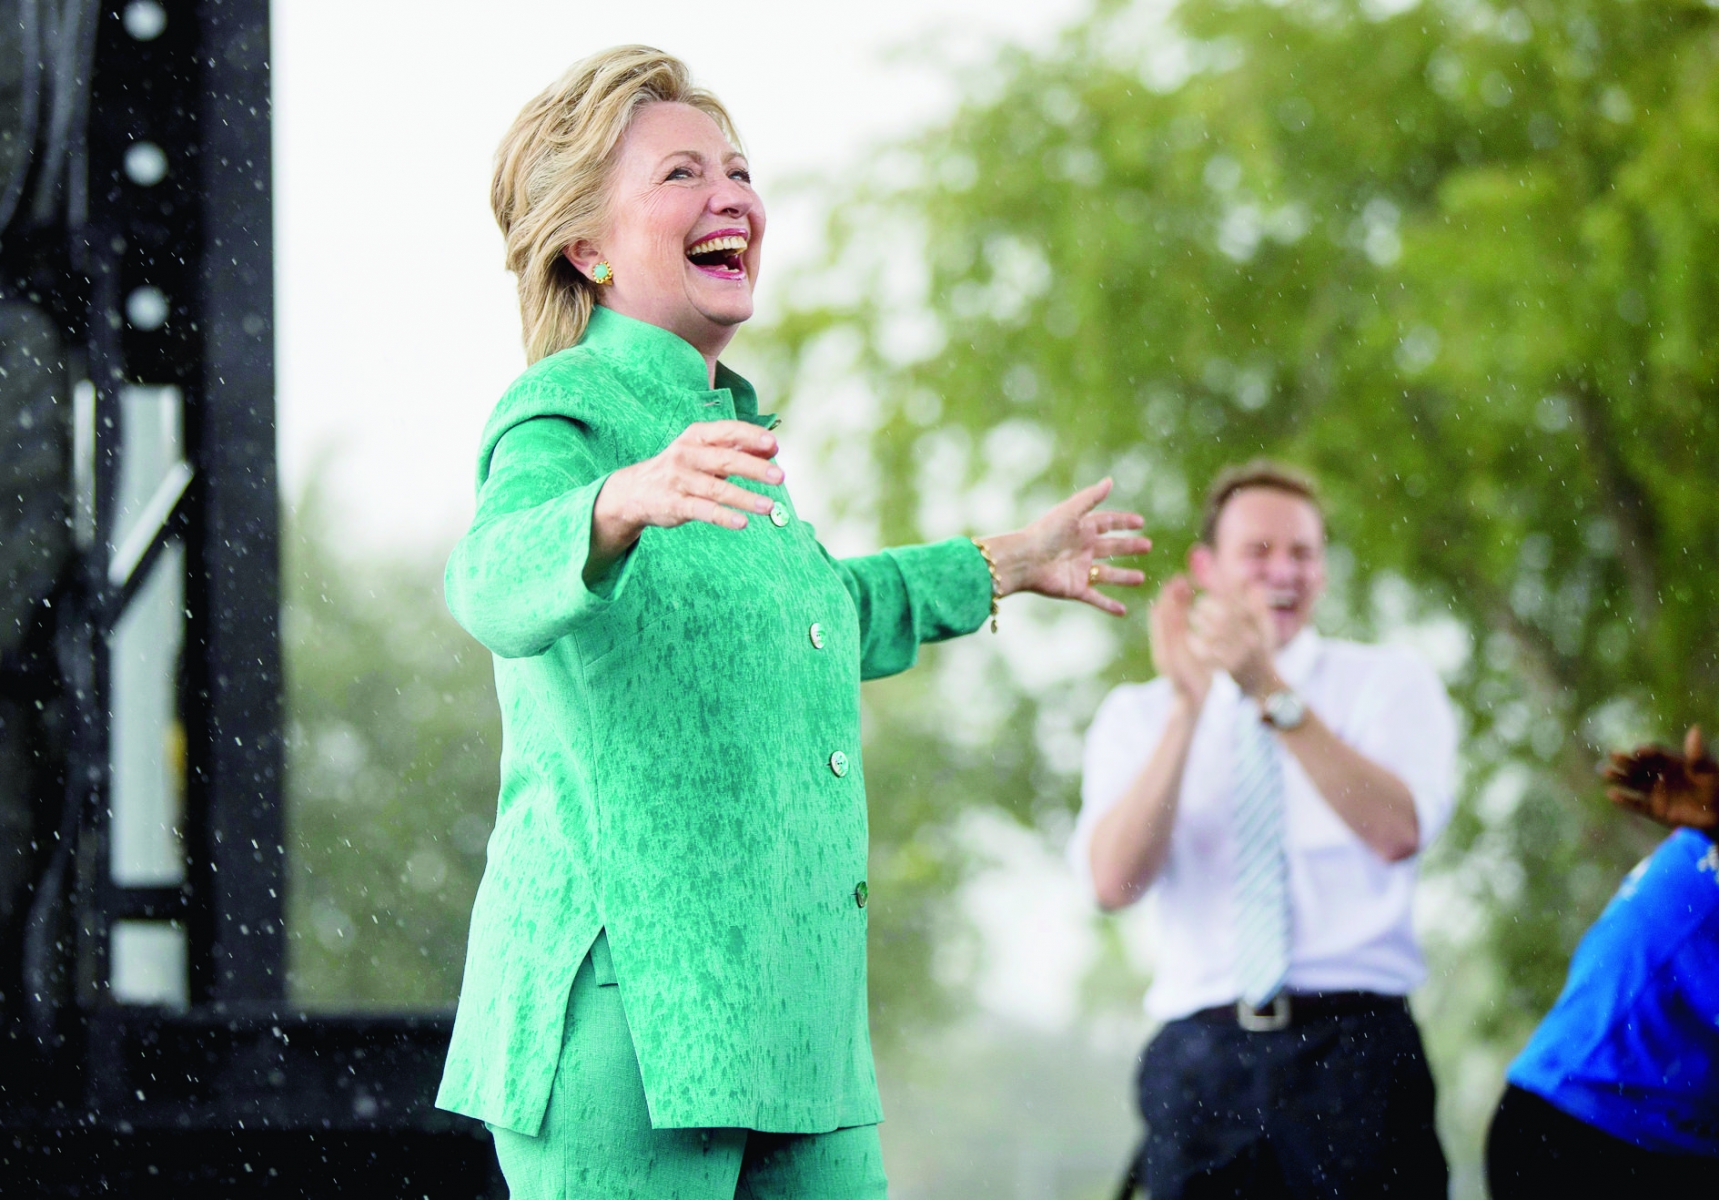 Democratic presidential candidate Hillary Clinton smiles as she cuts her speech short due to rain at a rally at C.B. Smith Park in Pembroke Pines, Fla., Saturday, Nov. 5, 2016. (AP Photo/Andrew Harnik) Campaign 2016 Clinton